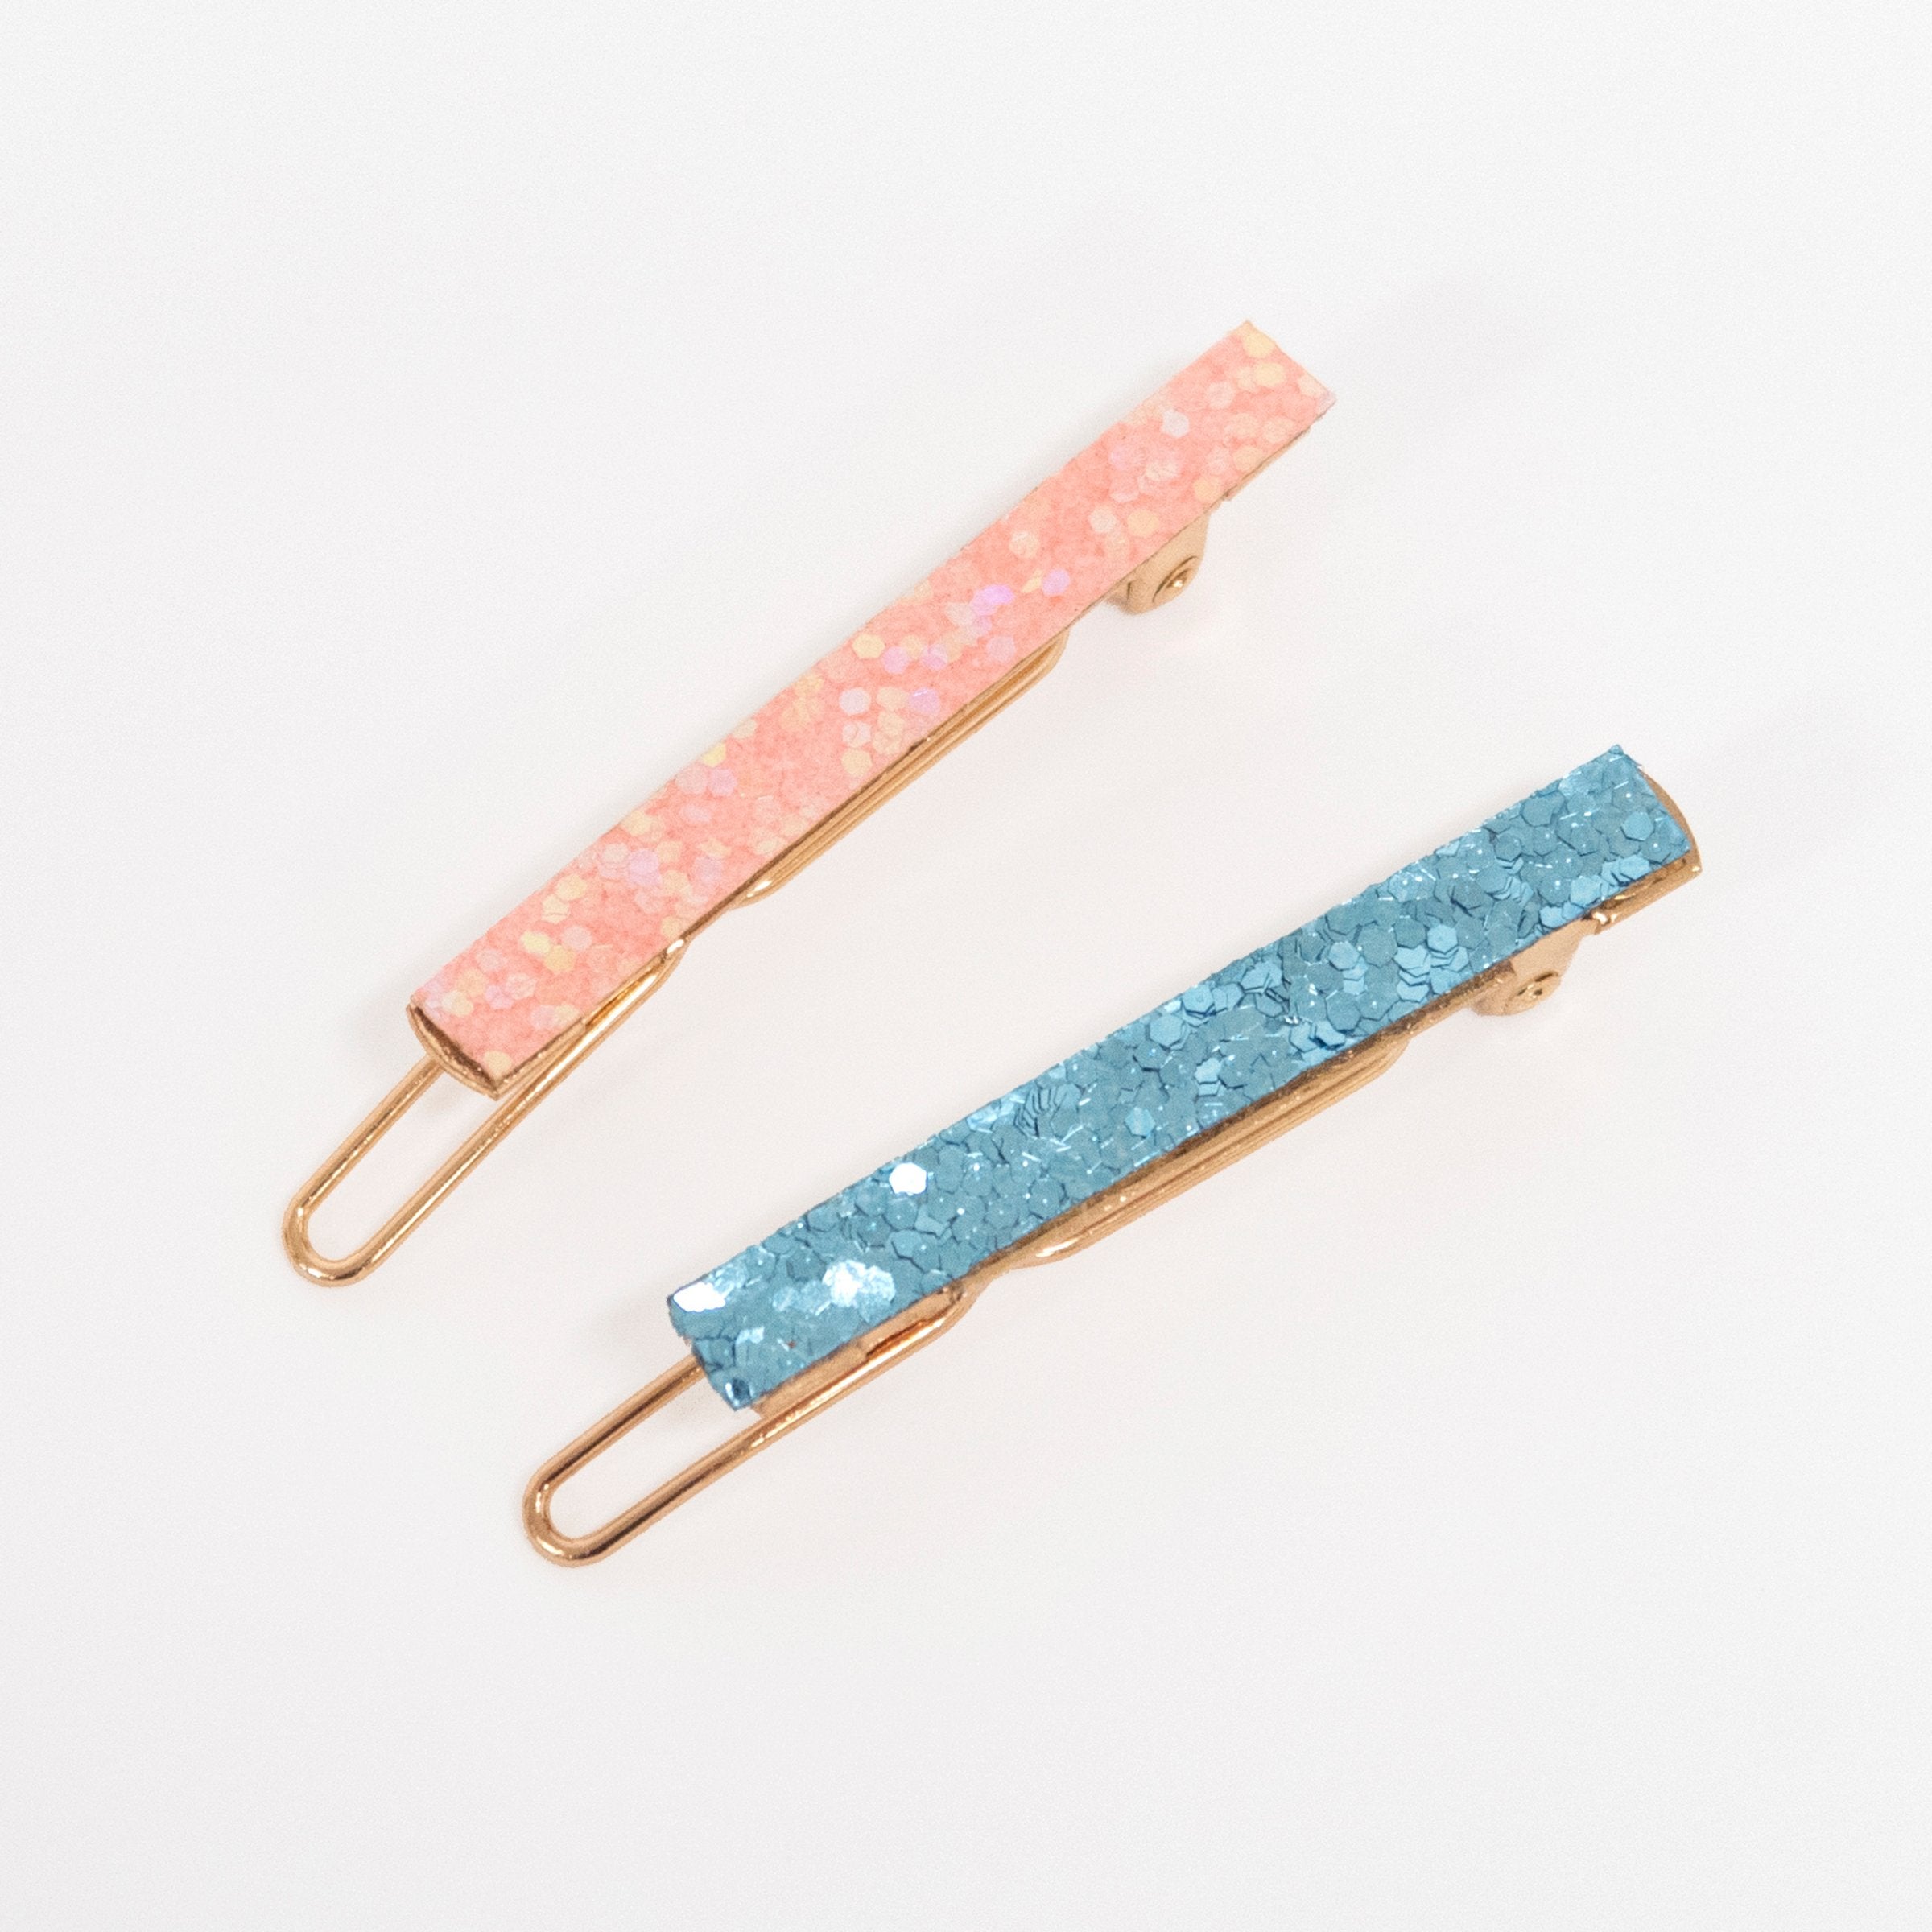 Get great party hair with our glitter hair accessories.